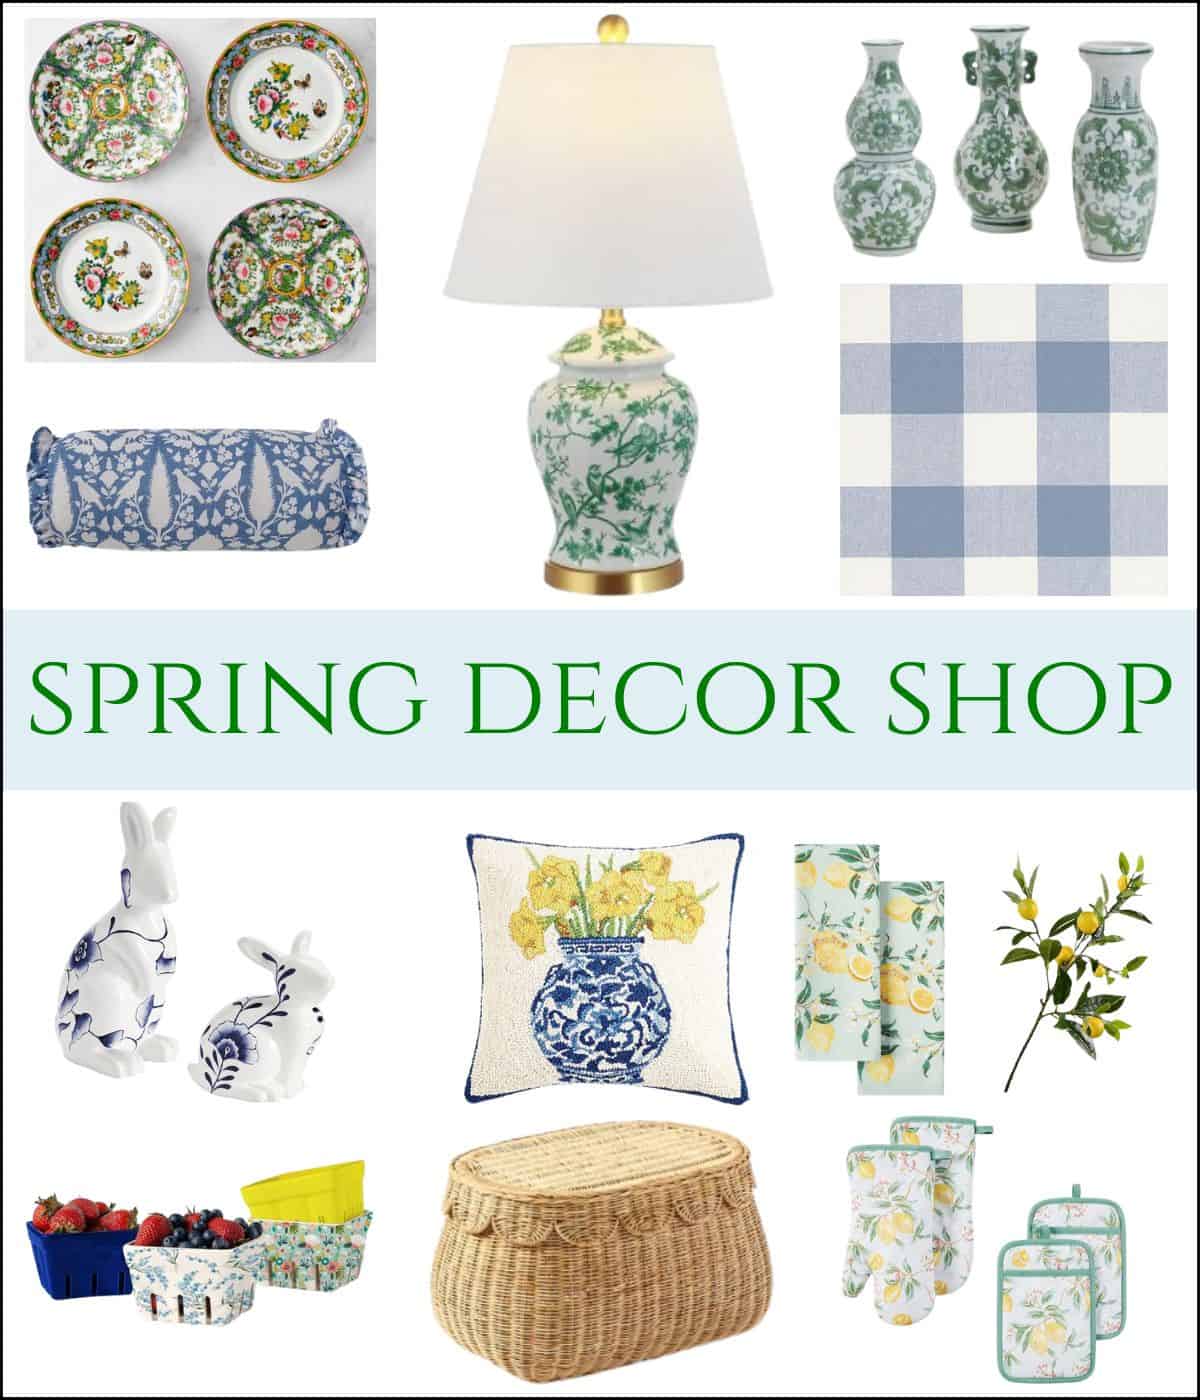 It’s Here! The Spring Decor Shopping Guide